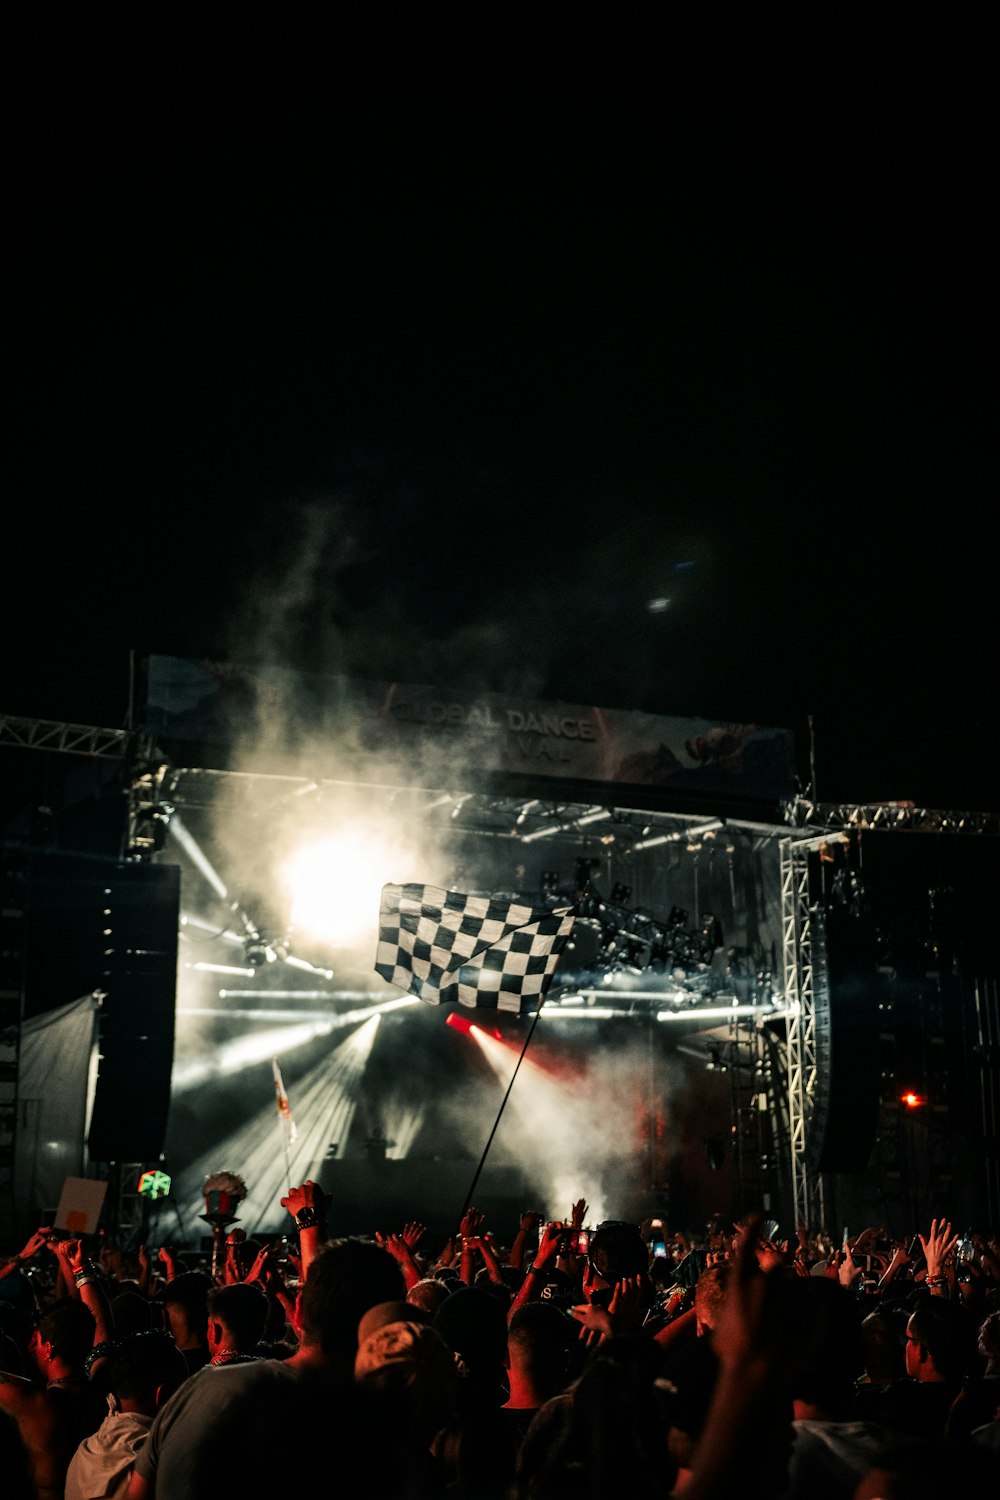 people standing on stage during nighttime